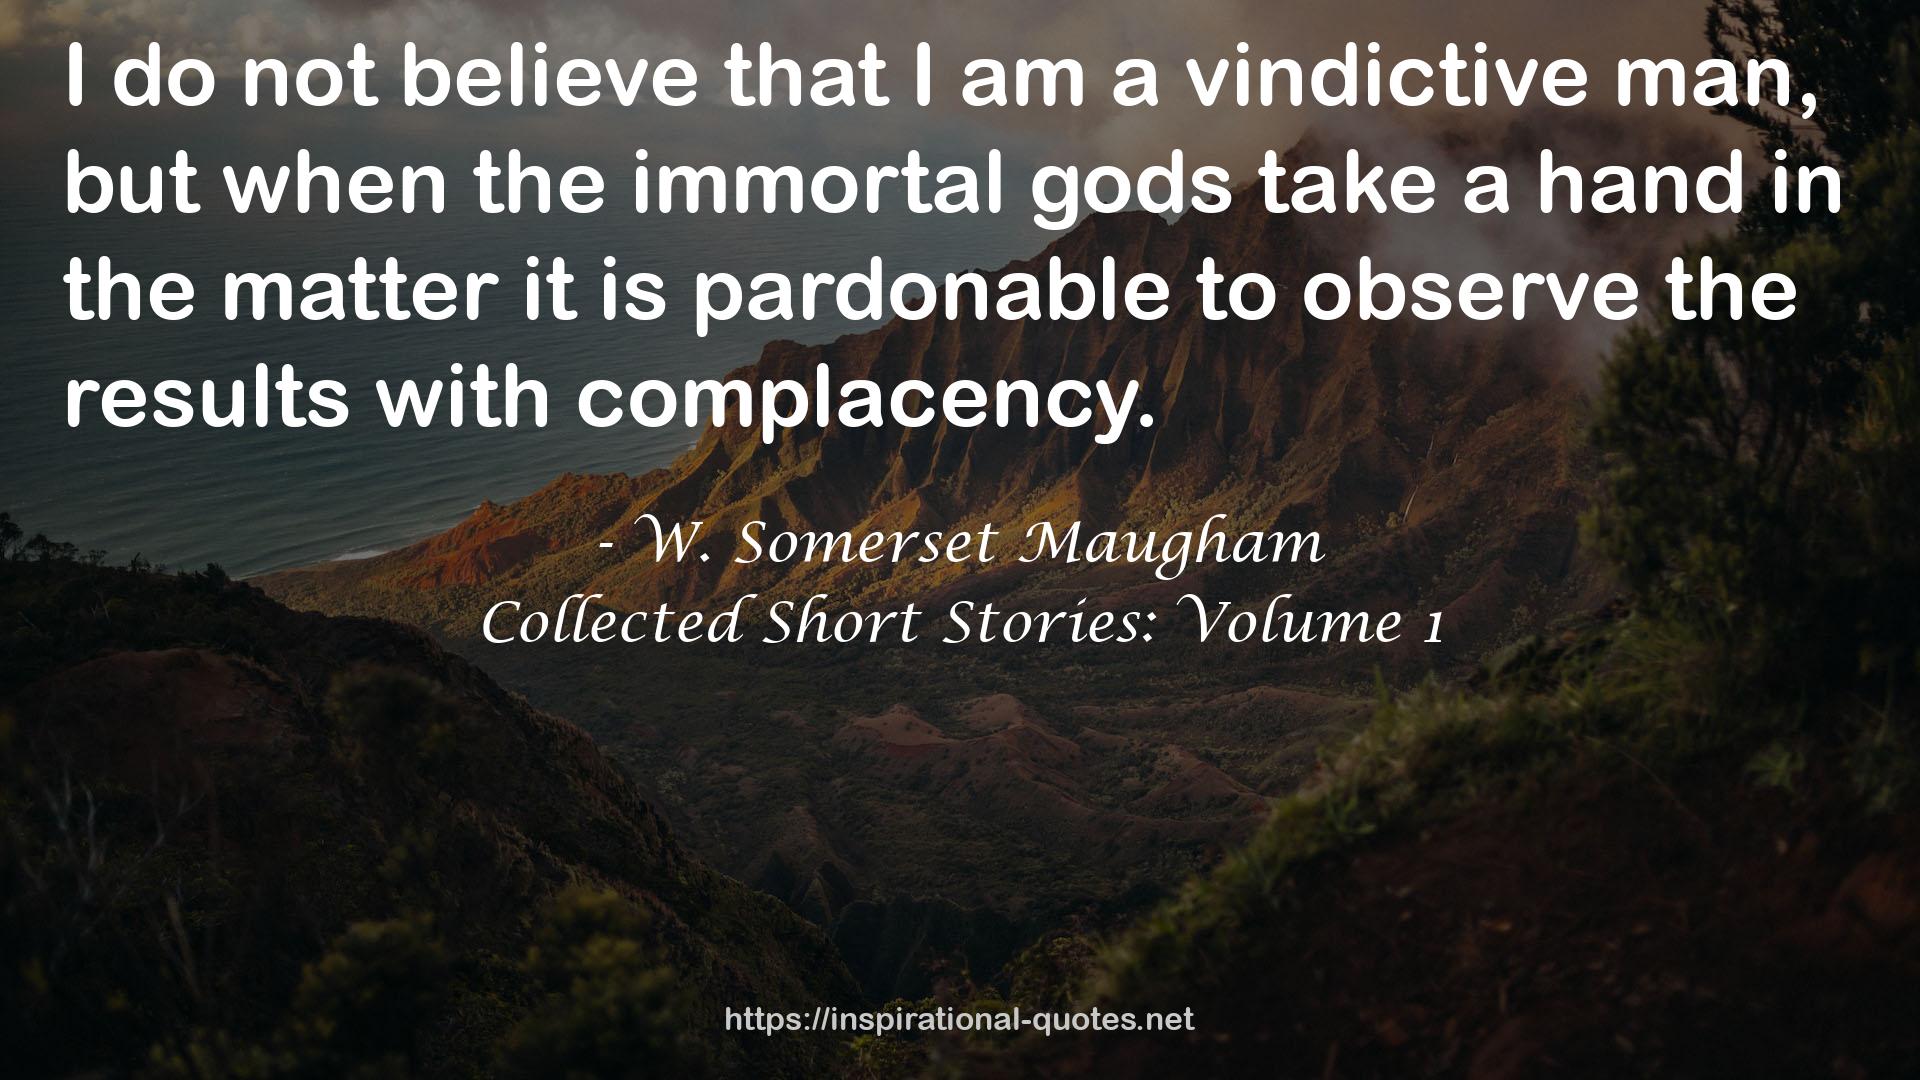 W. Somerset Maugham QUOTES